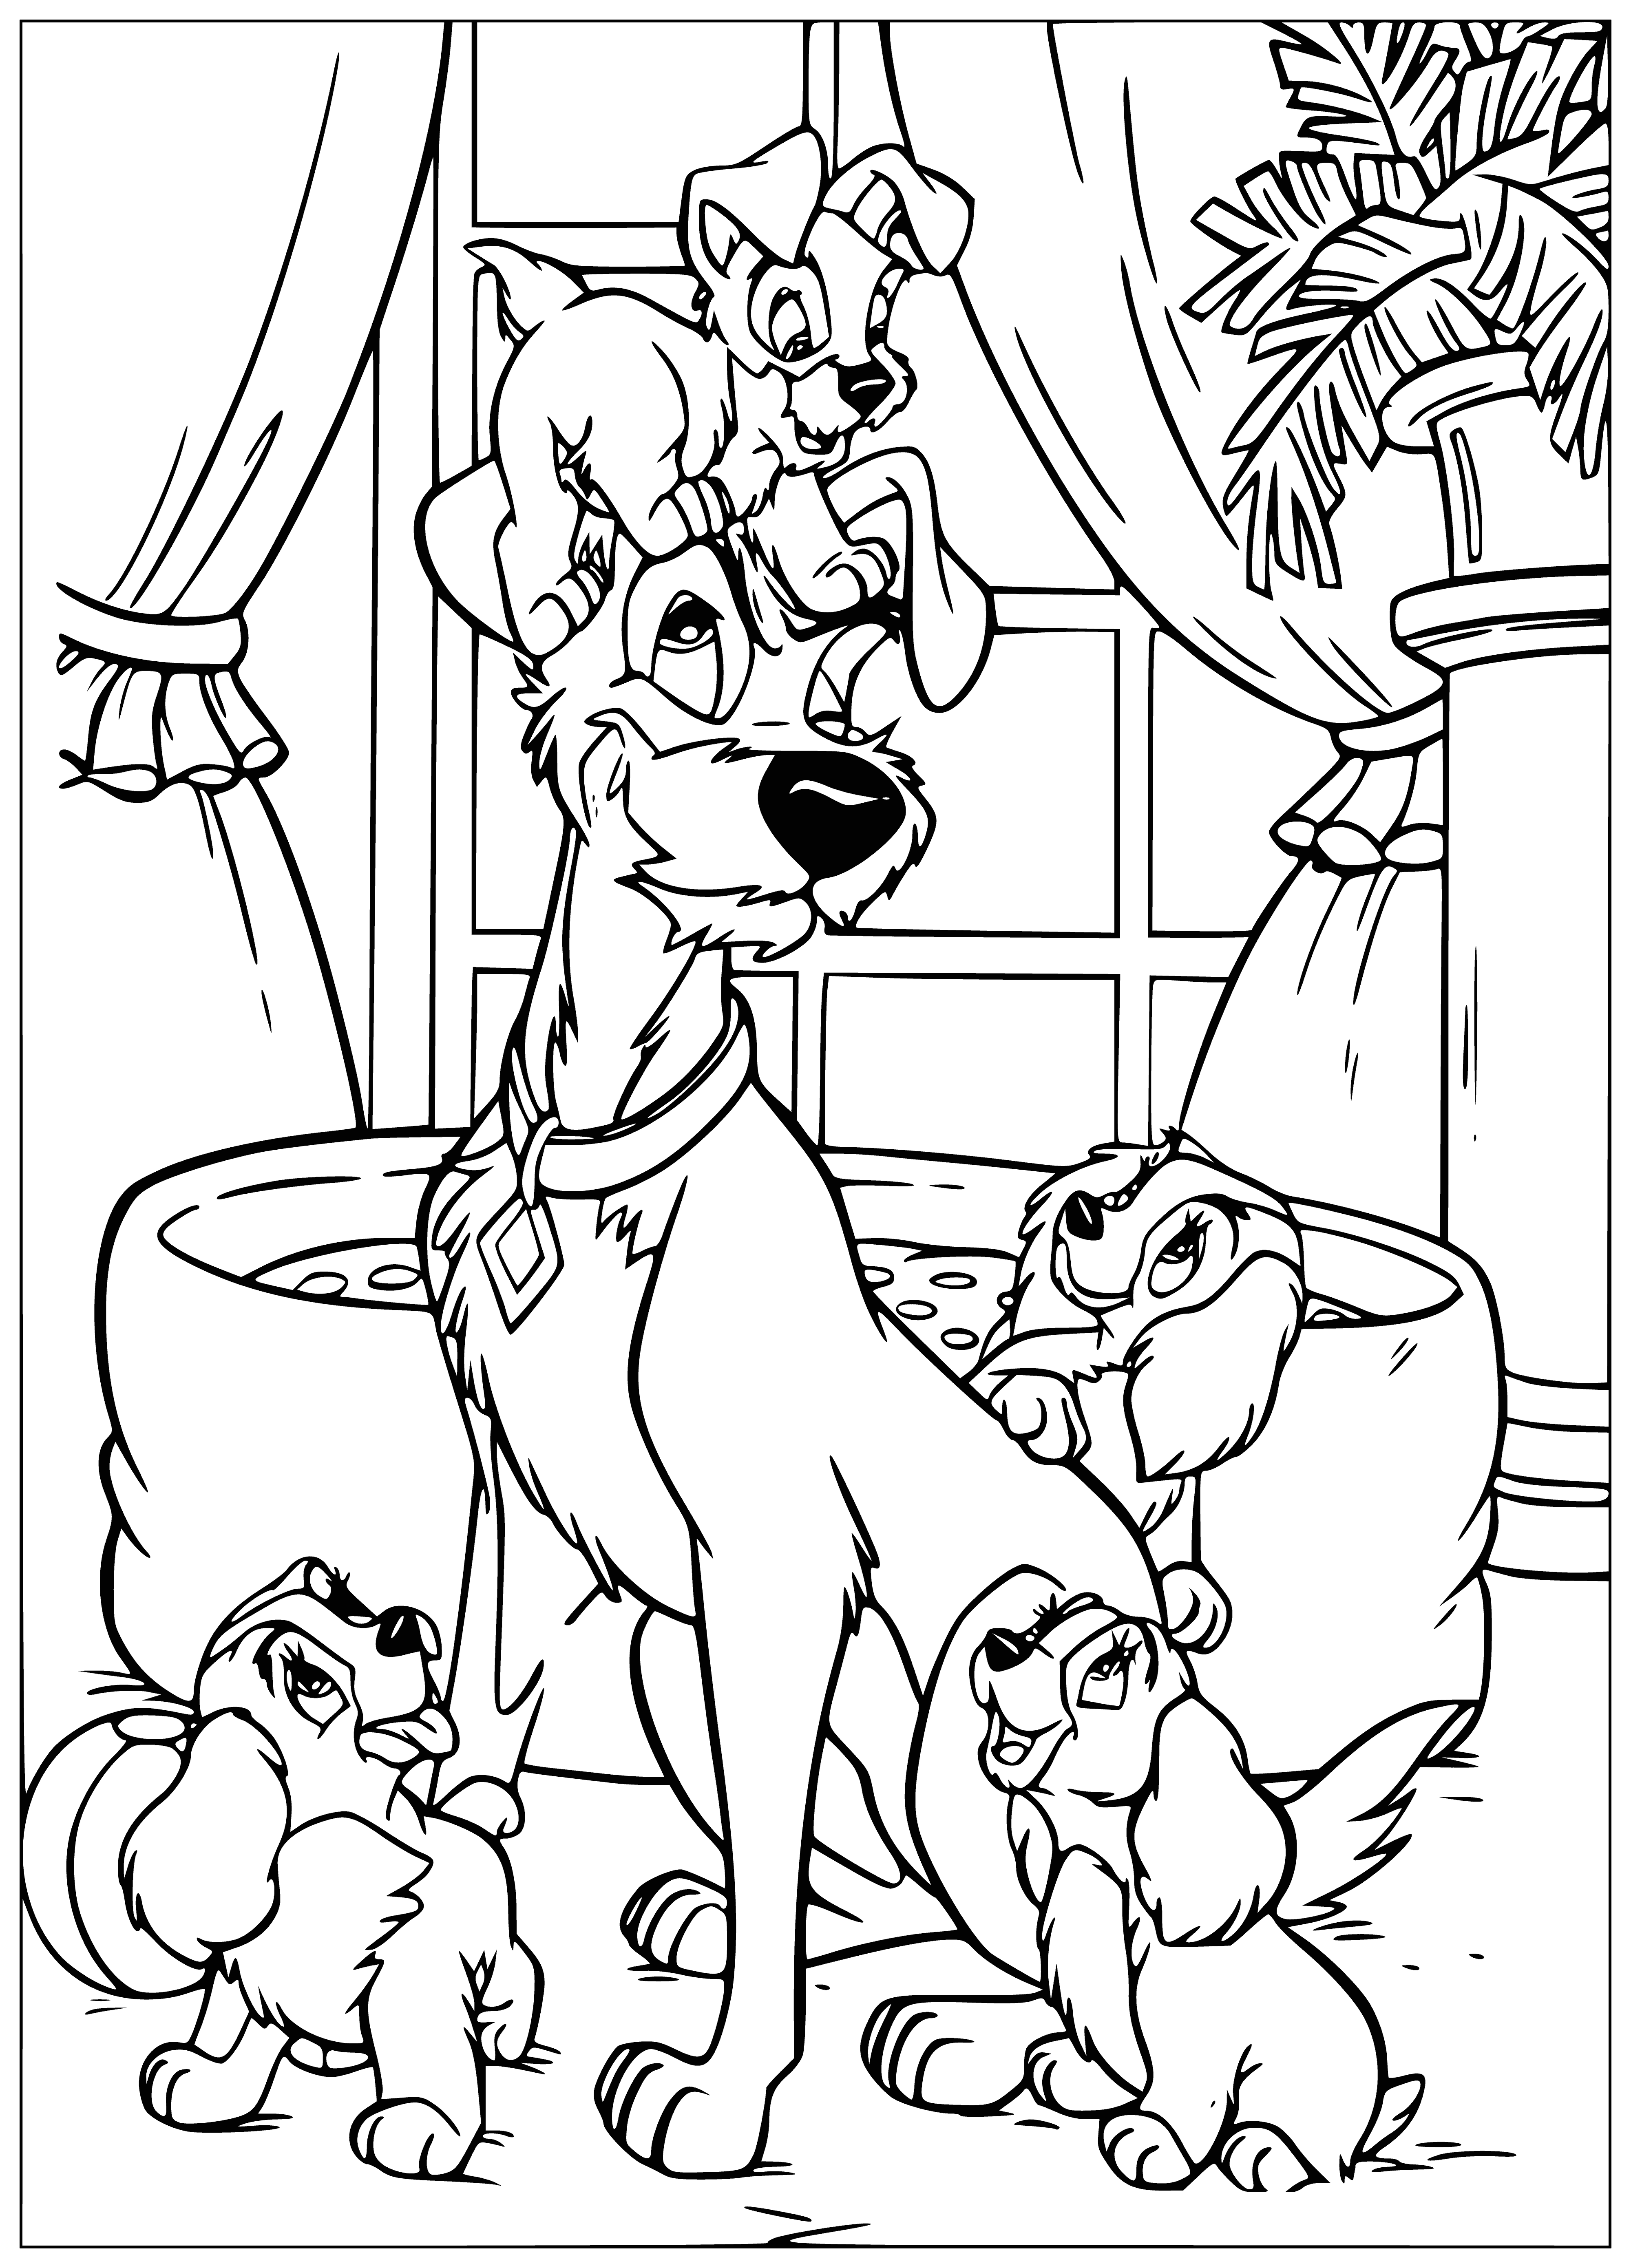 Restless puppy coloring page